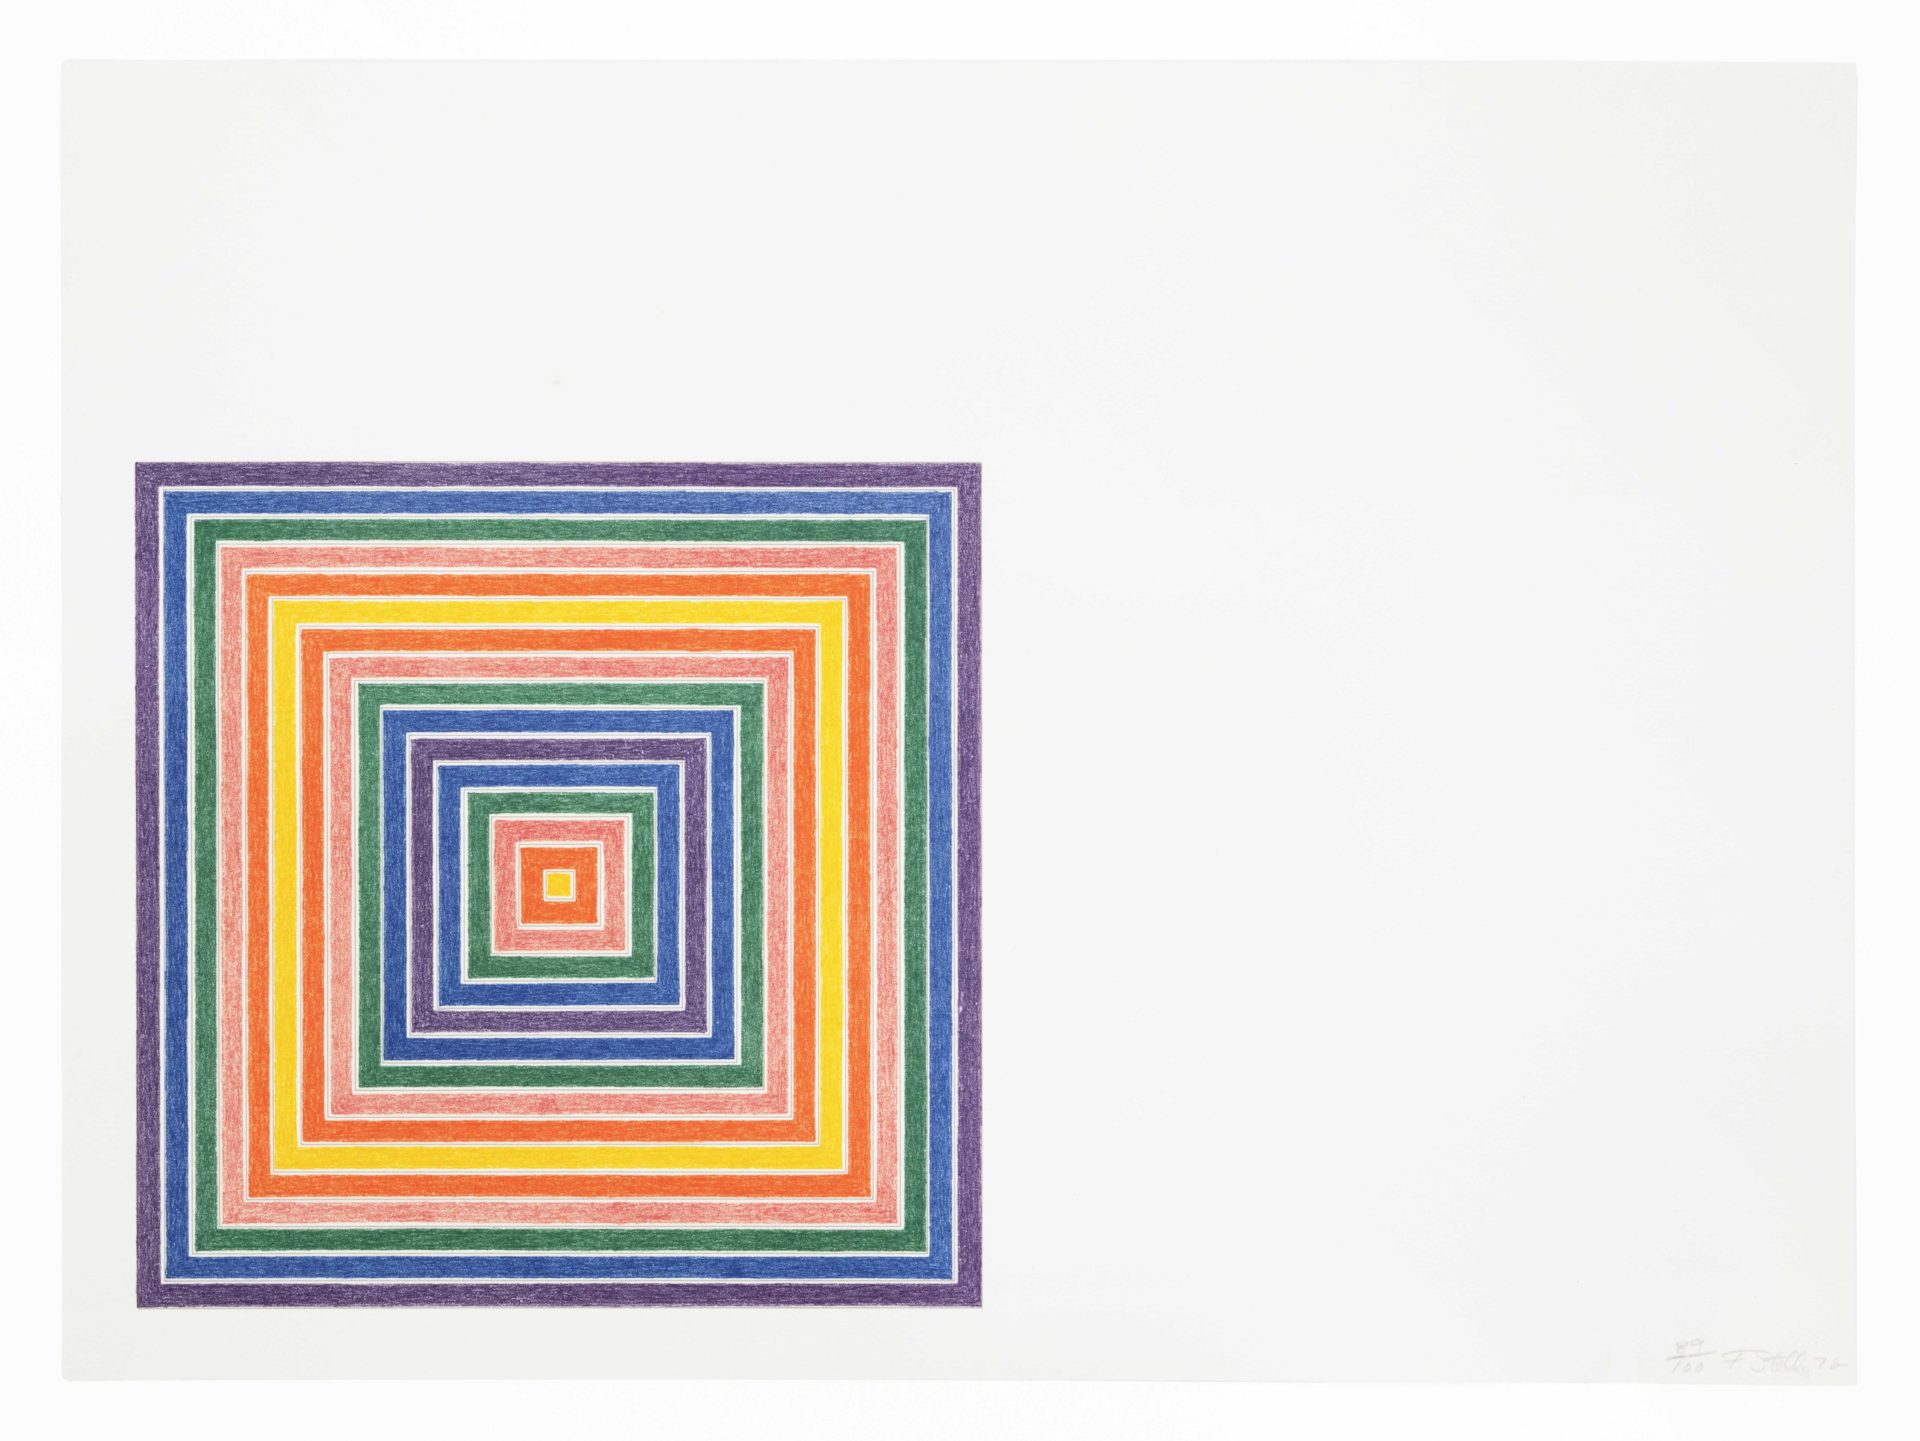 Frank Stella Honduras Lottery Co., from Multicolored Squares, 1972 Lithograph Image Dimensions: 16 x 21 7/10 inches (40.6 x 55.1 cm) Paper Dimensions: 40 1/2 x 55 1/8 inches (102.9 x 140 cm) Edition of 100